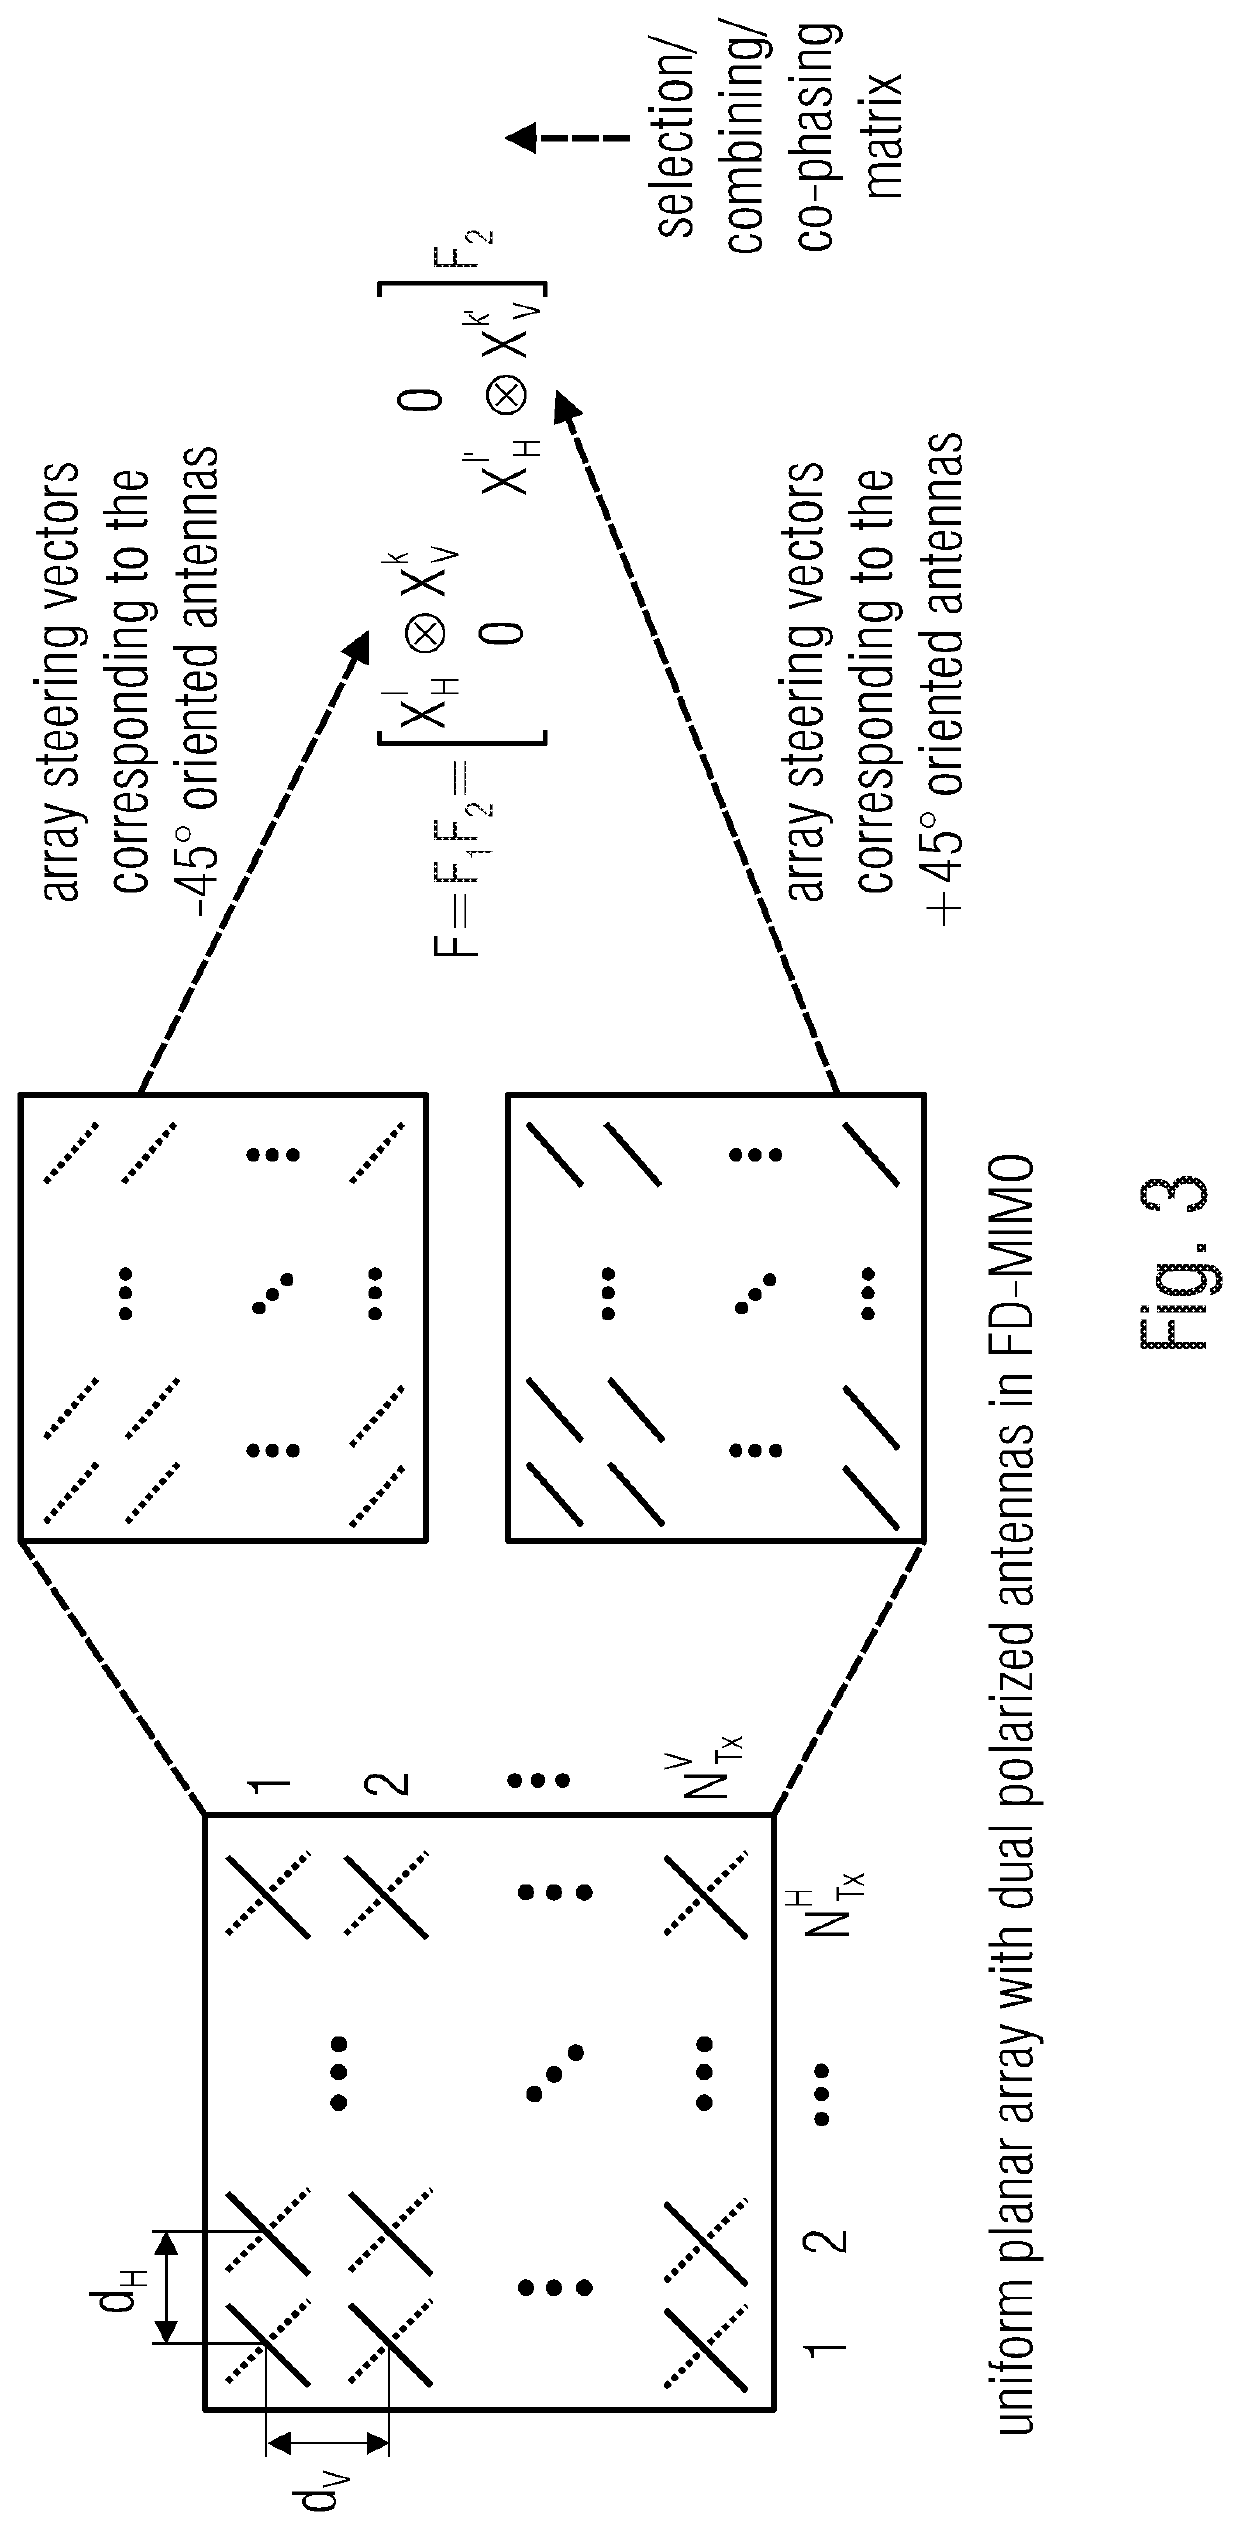 Antenna array codebook with beamforming coefficients adapted to an arbitrary antenna response of the antenna array